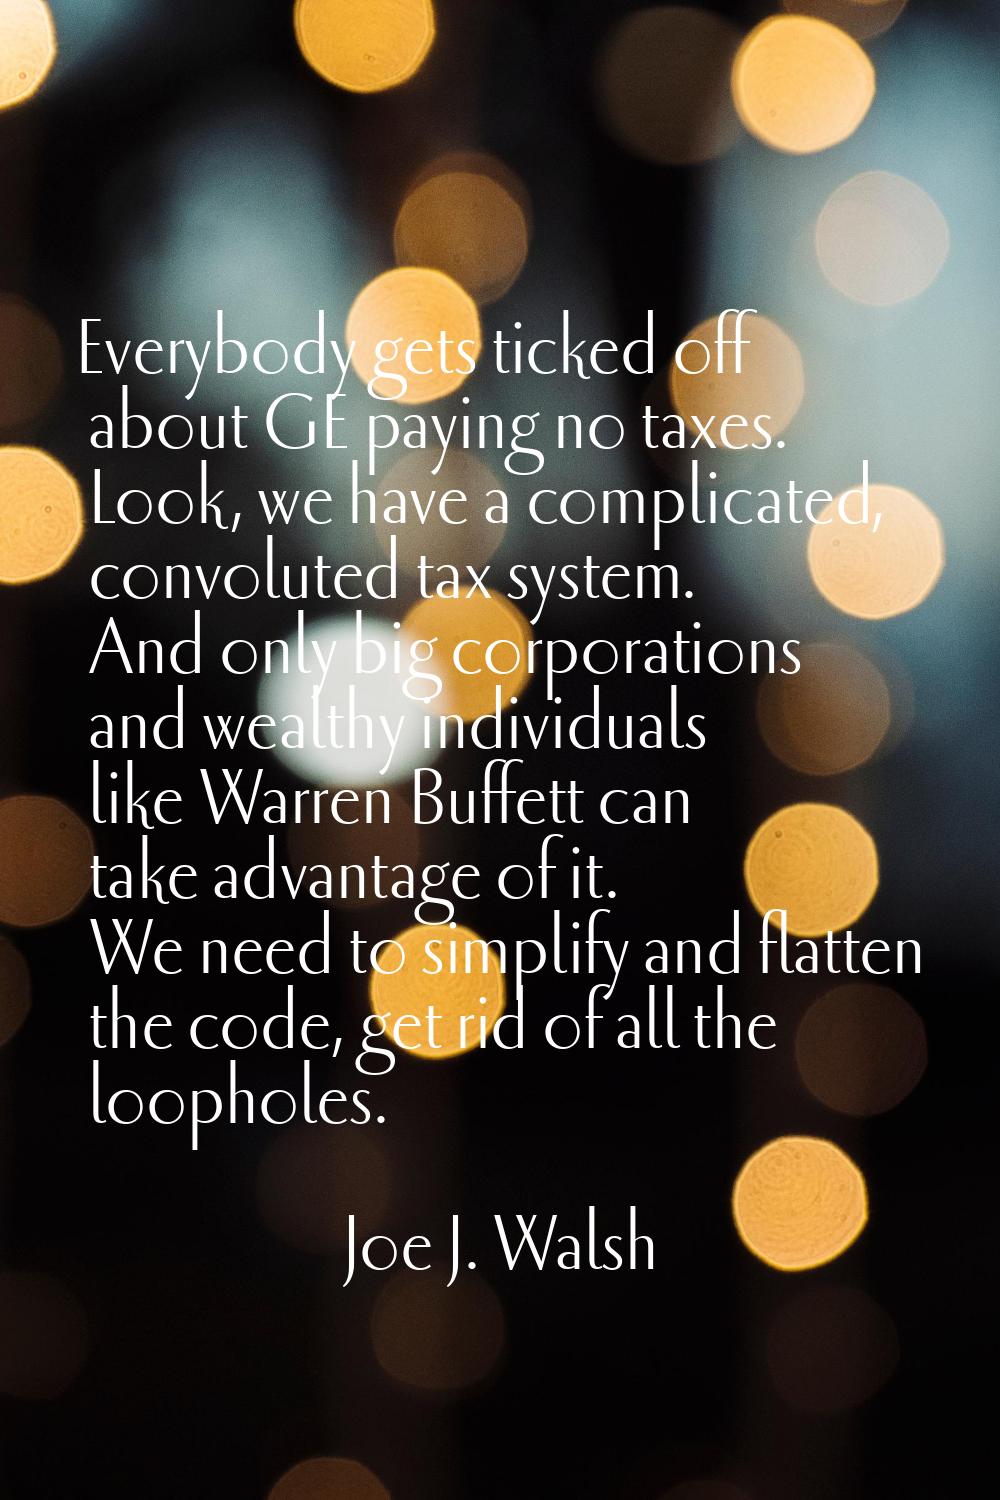 Everybody gets ticked off about GE paying no taxes. Look, we have a complicated, convoluted tax sys